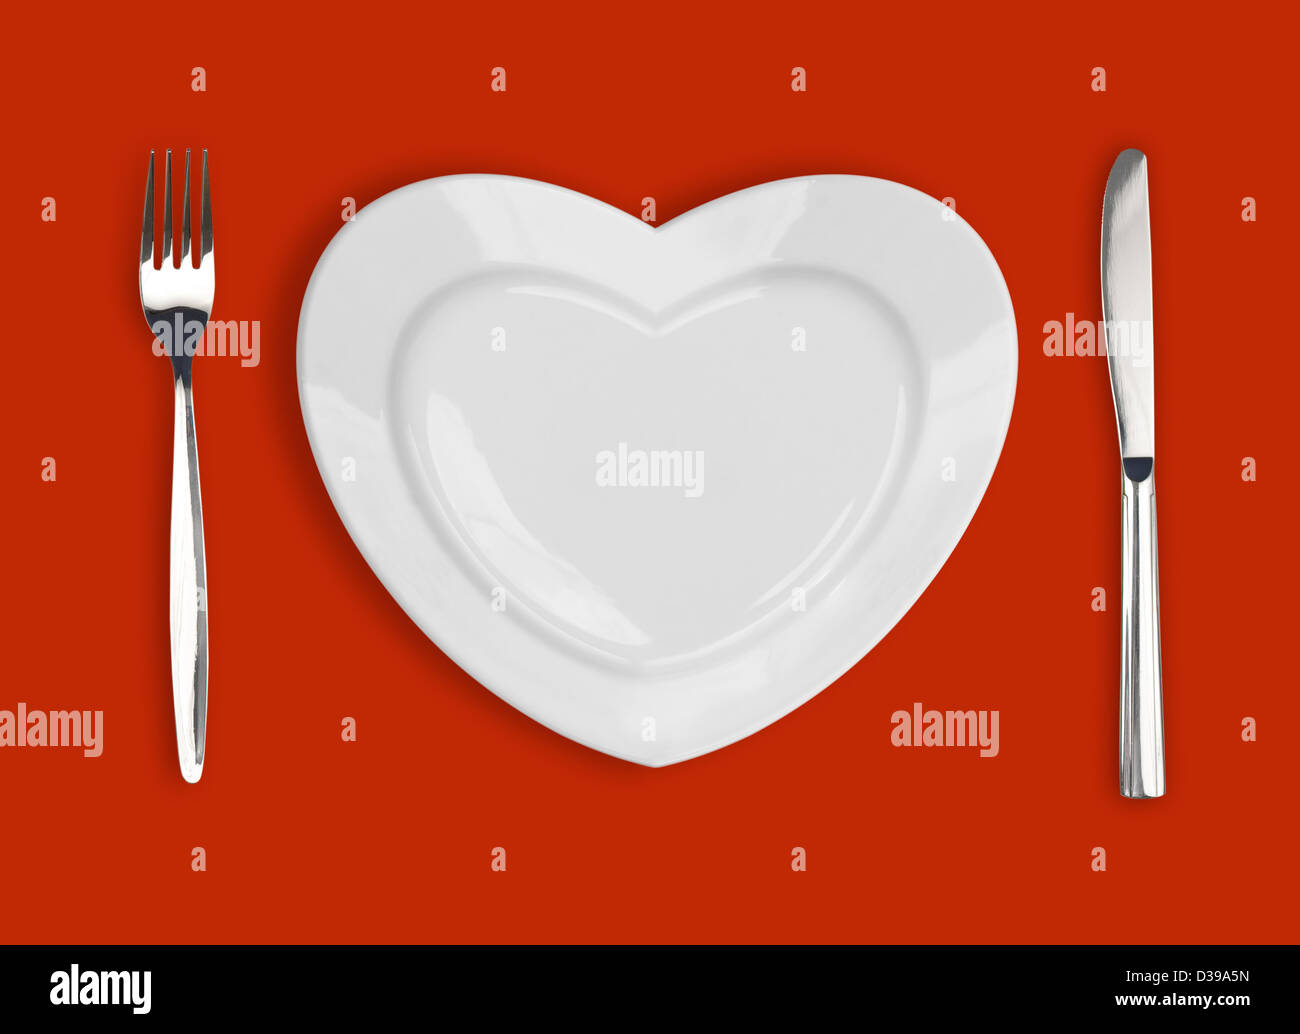 plate in shape of heart, table knife and fork on red background Stock Photo